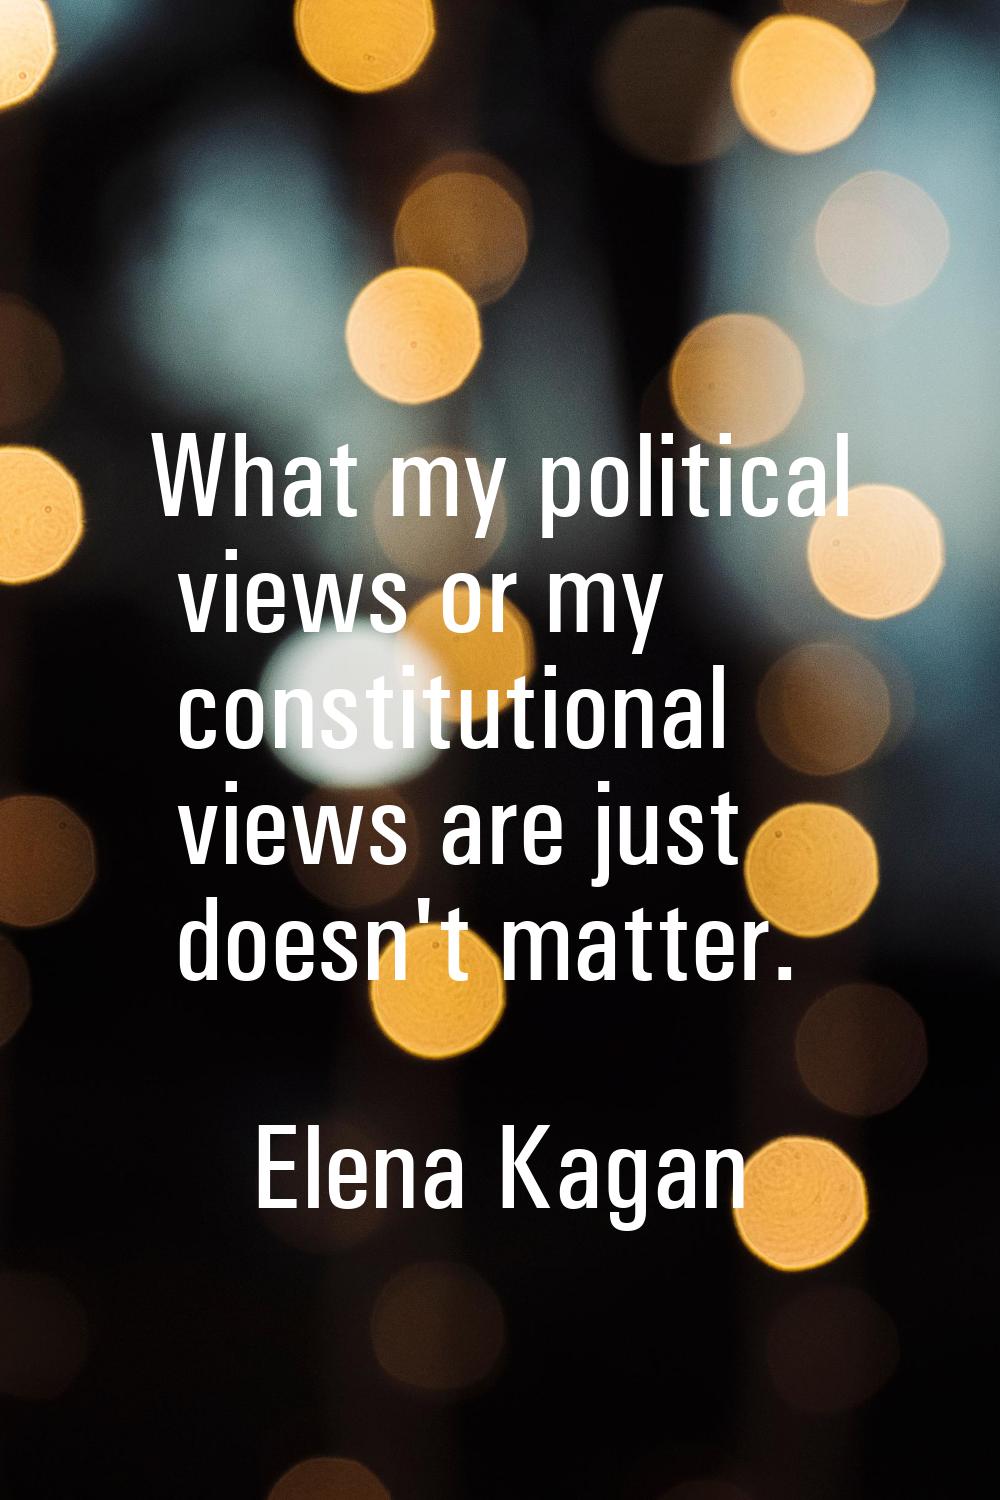 What my political views or my constitutional views are just doesn't matter.